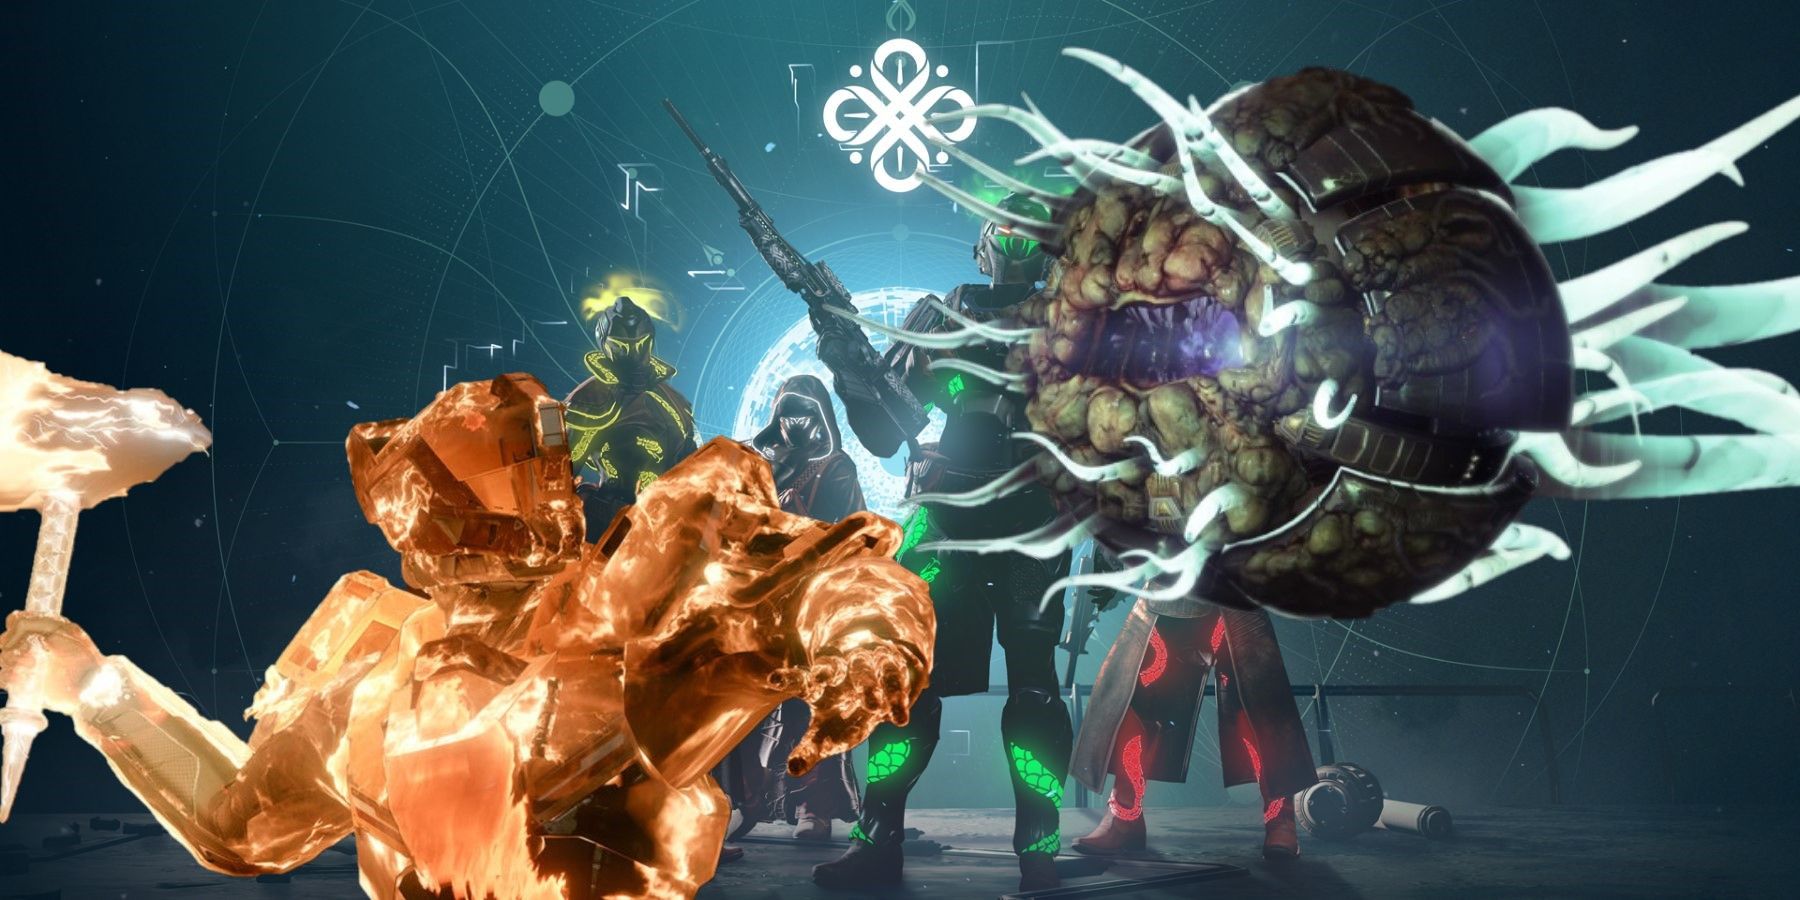 Destiny 2 Clip Shows Issues With Gambit and Titan Build